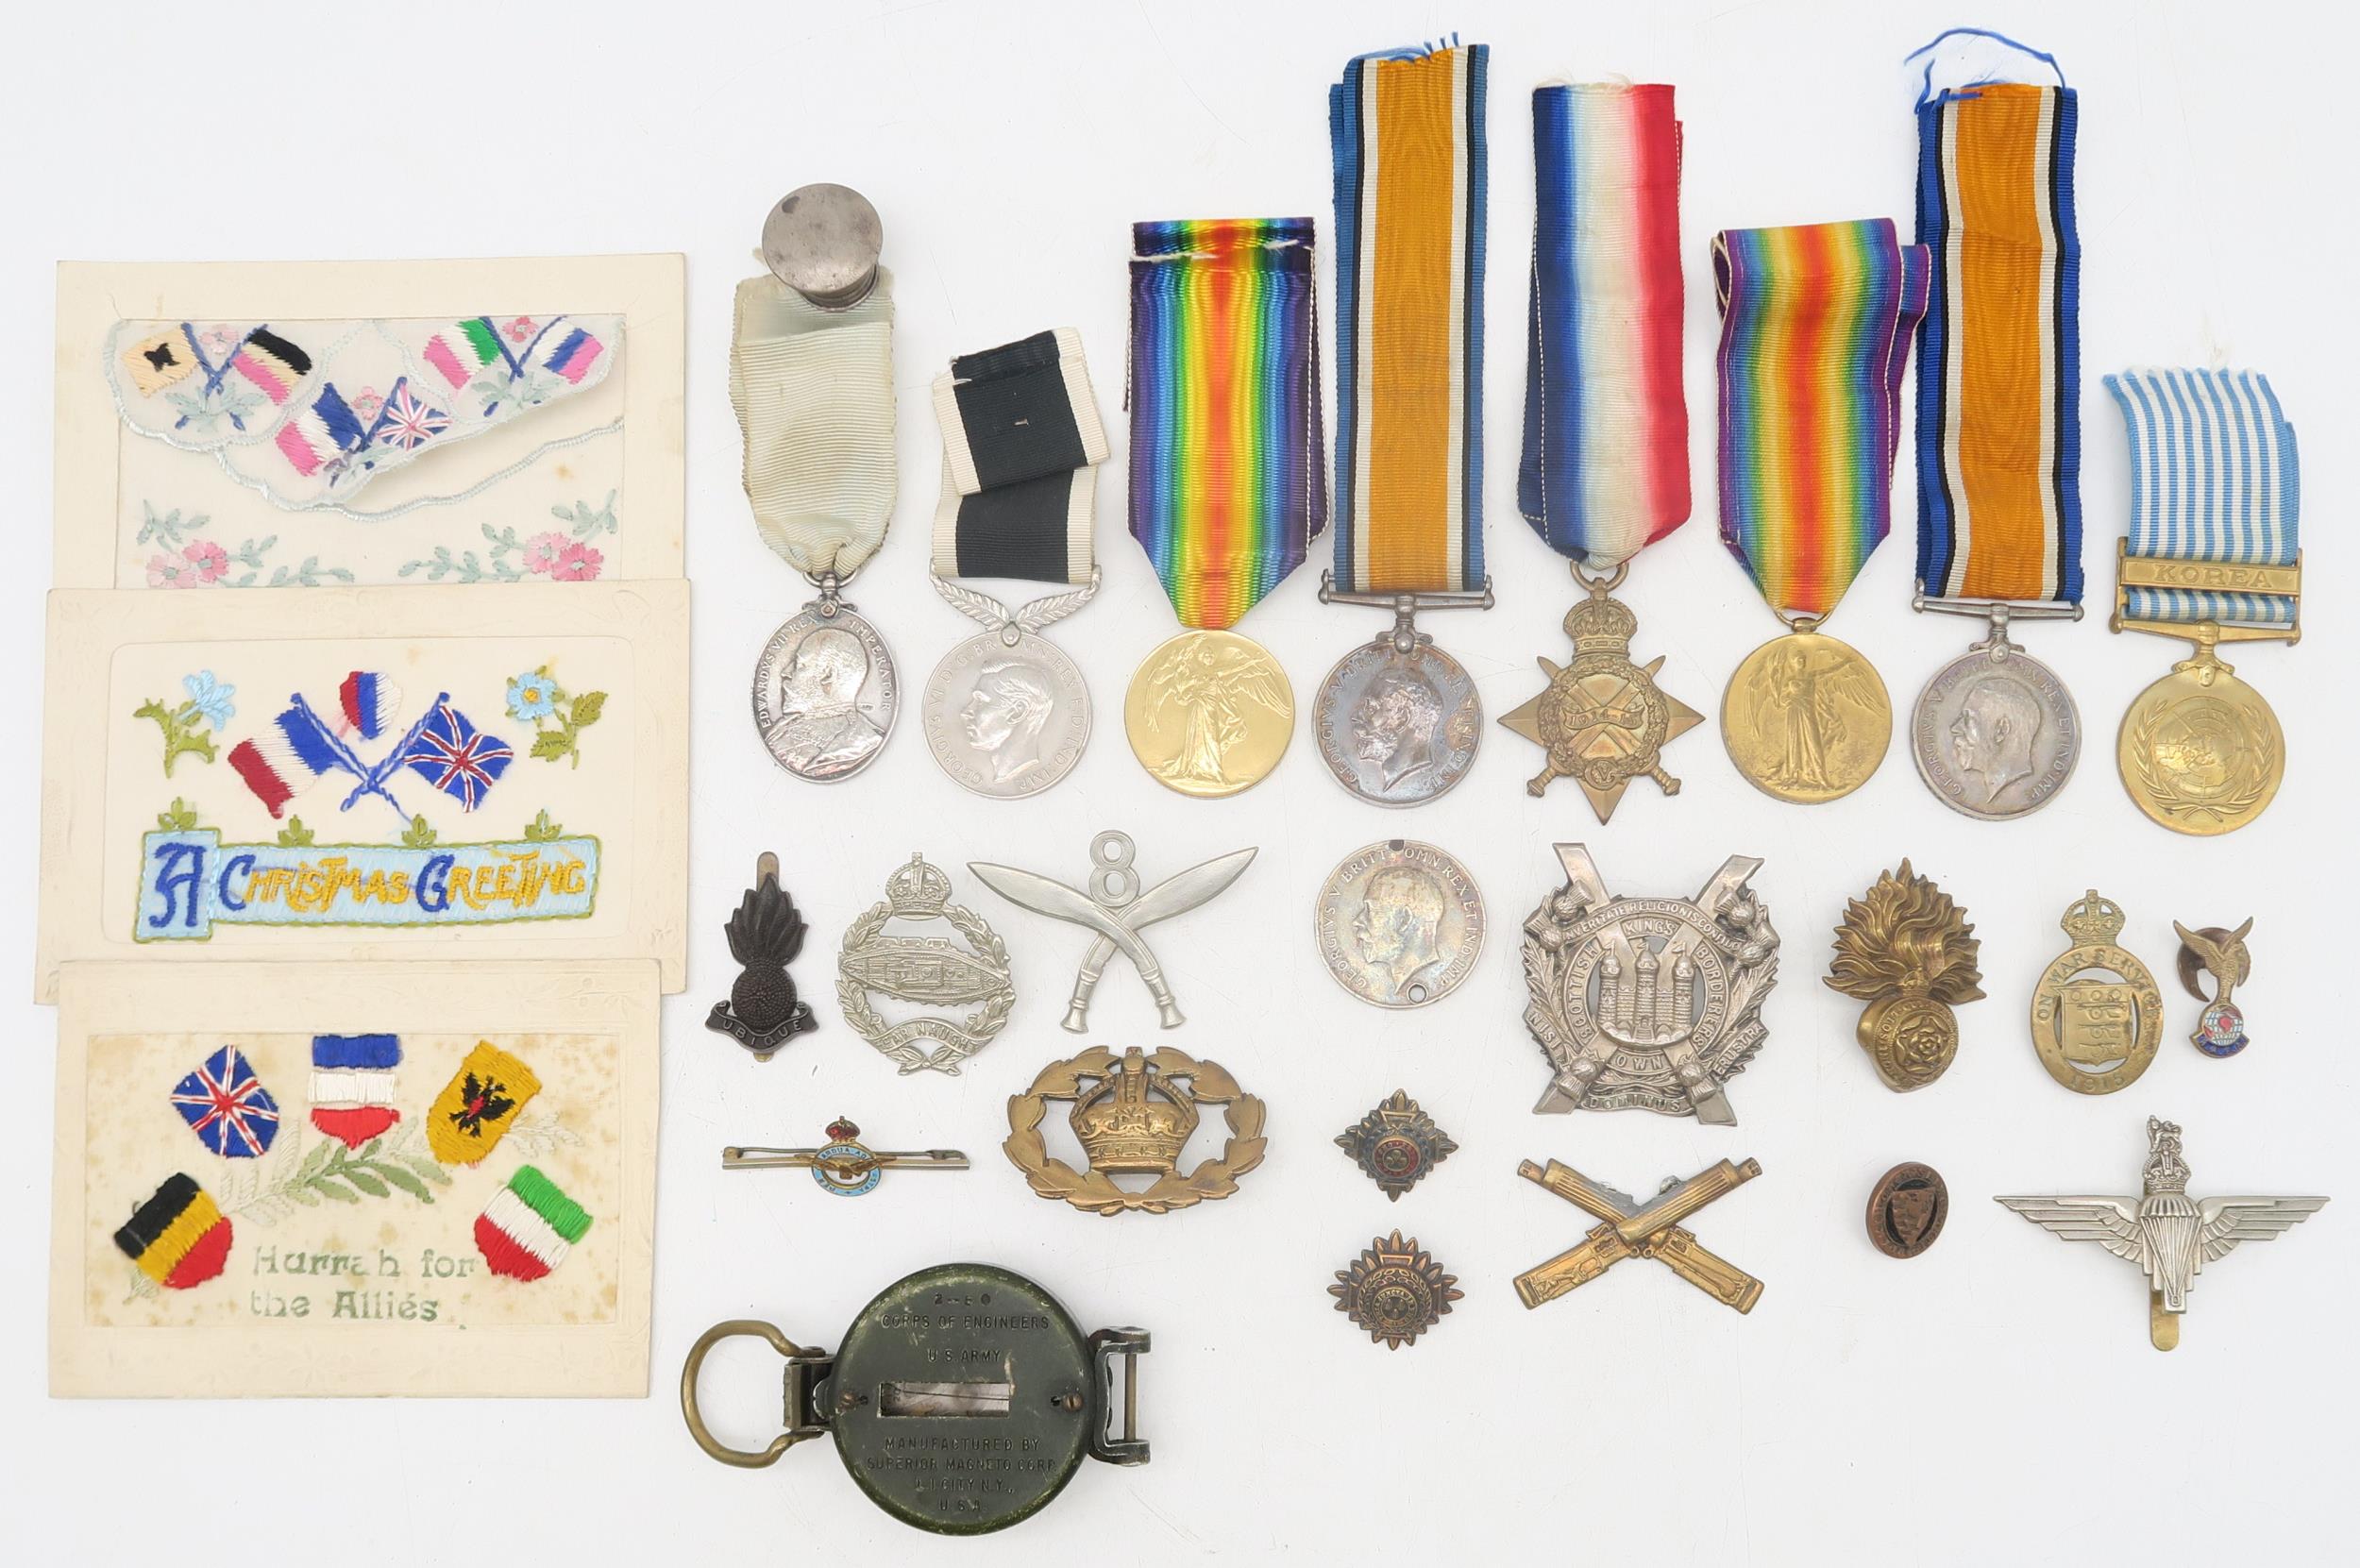 A WW1 medal group of three awarded to 194312 J. Ellis, Petty Officer First Class, Royal Navy,